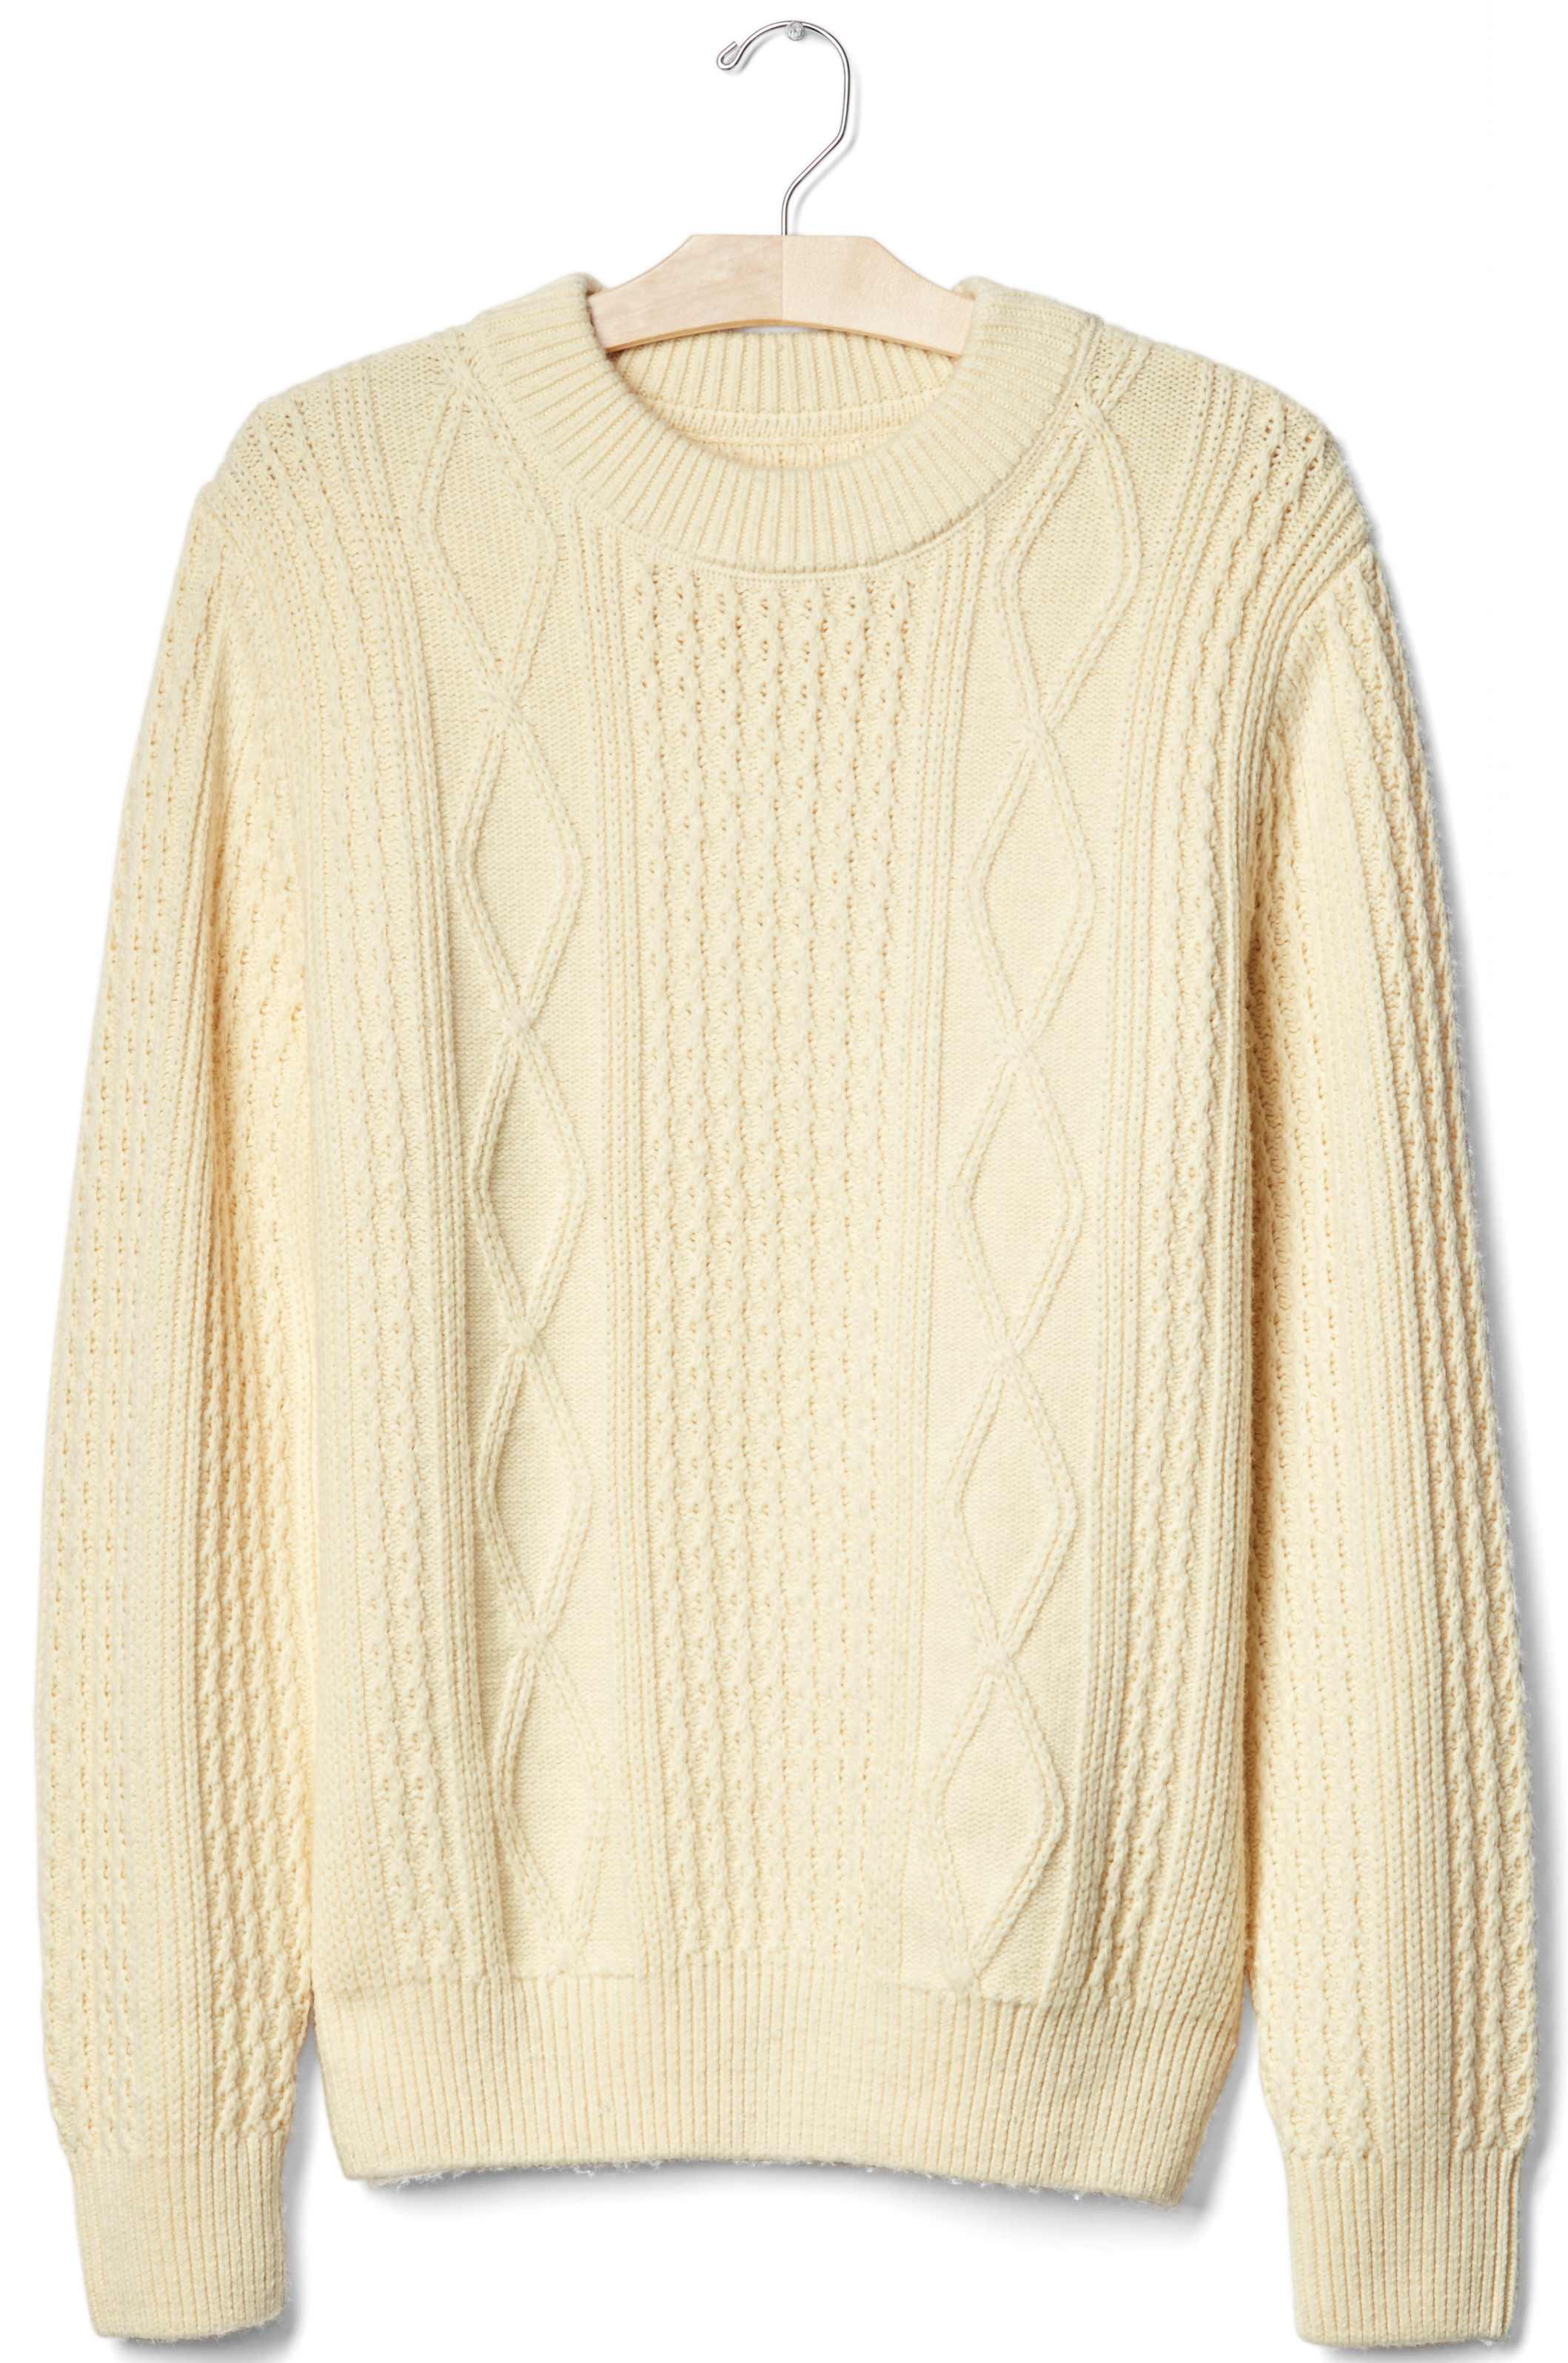 Gap Cable Knit Crew Sweater, $55.96